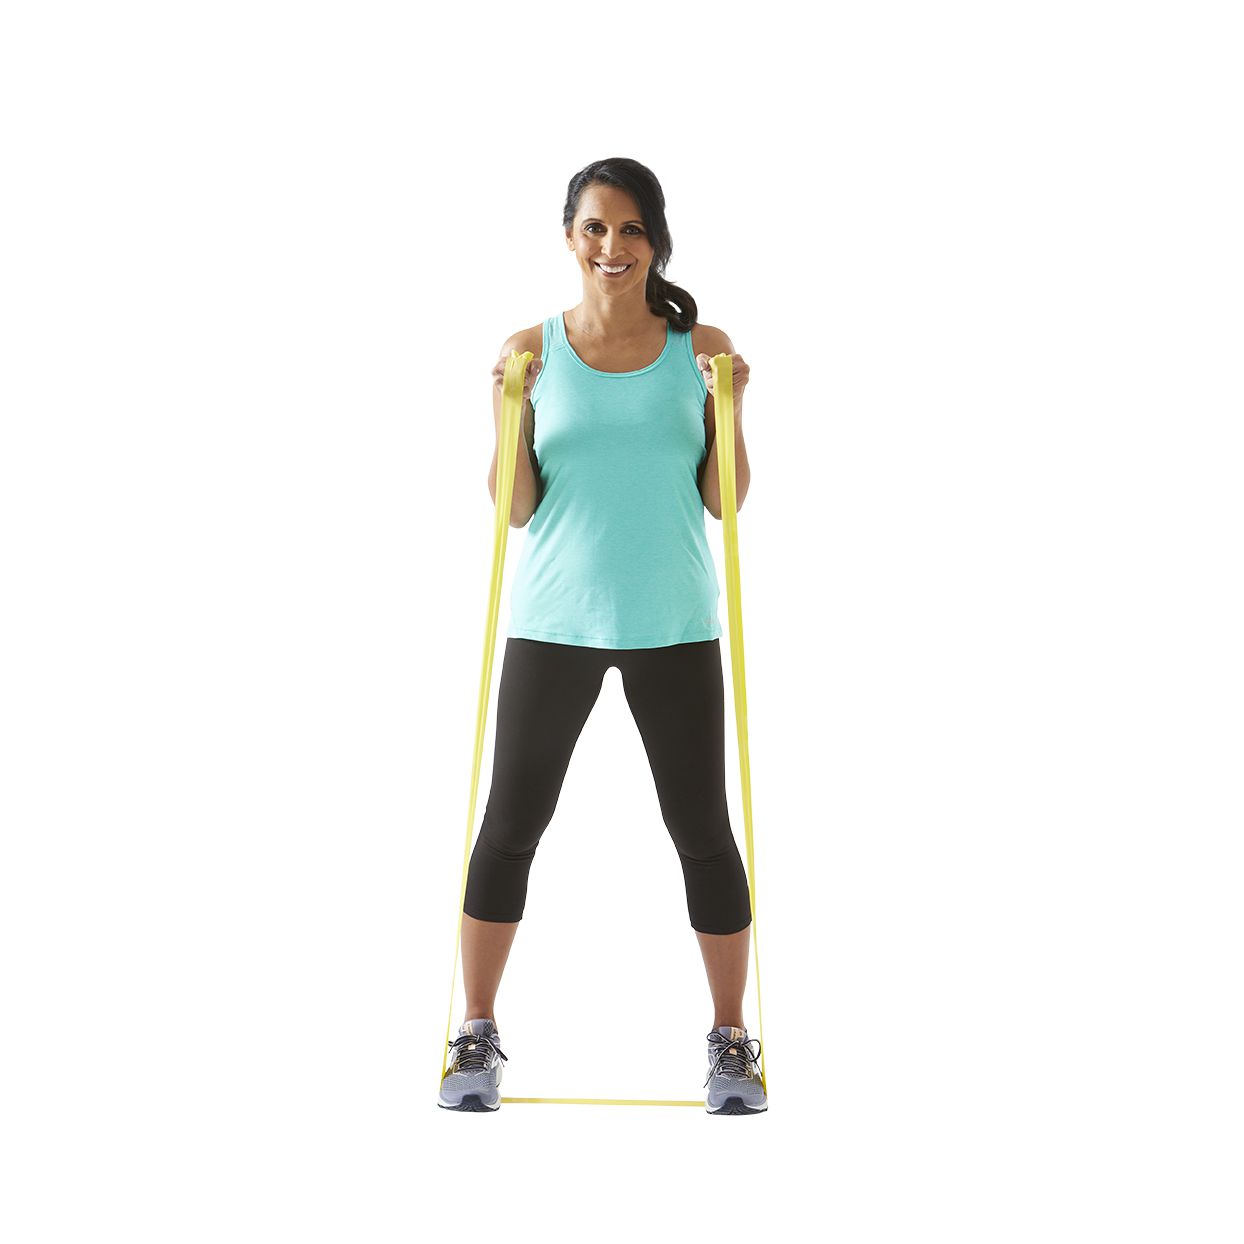 woman with resistance bands